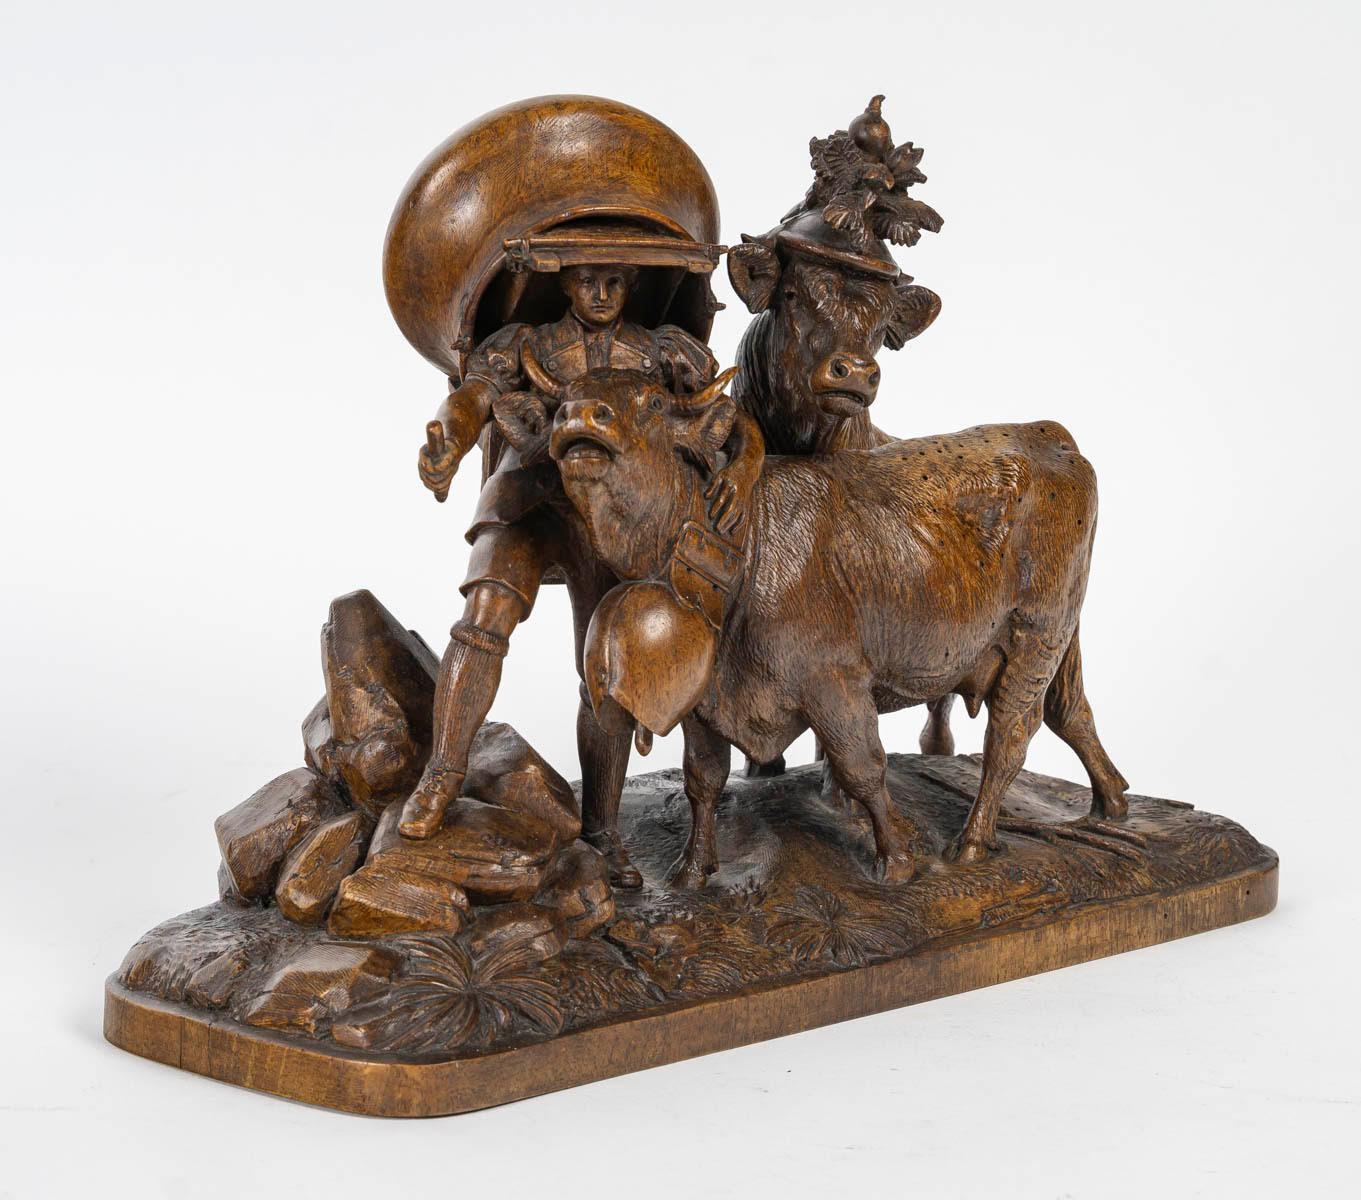 Wood carving of the black forest by Johan Huggier.

Carved wood sculpture of the black forest by Johan Huggier (1834-1912).  
h: 25cm, w: 33cm, d: 13cm